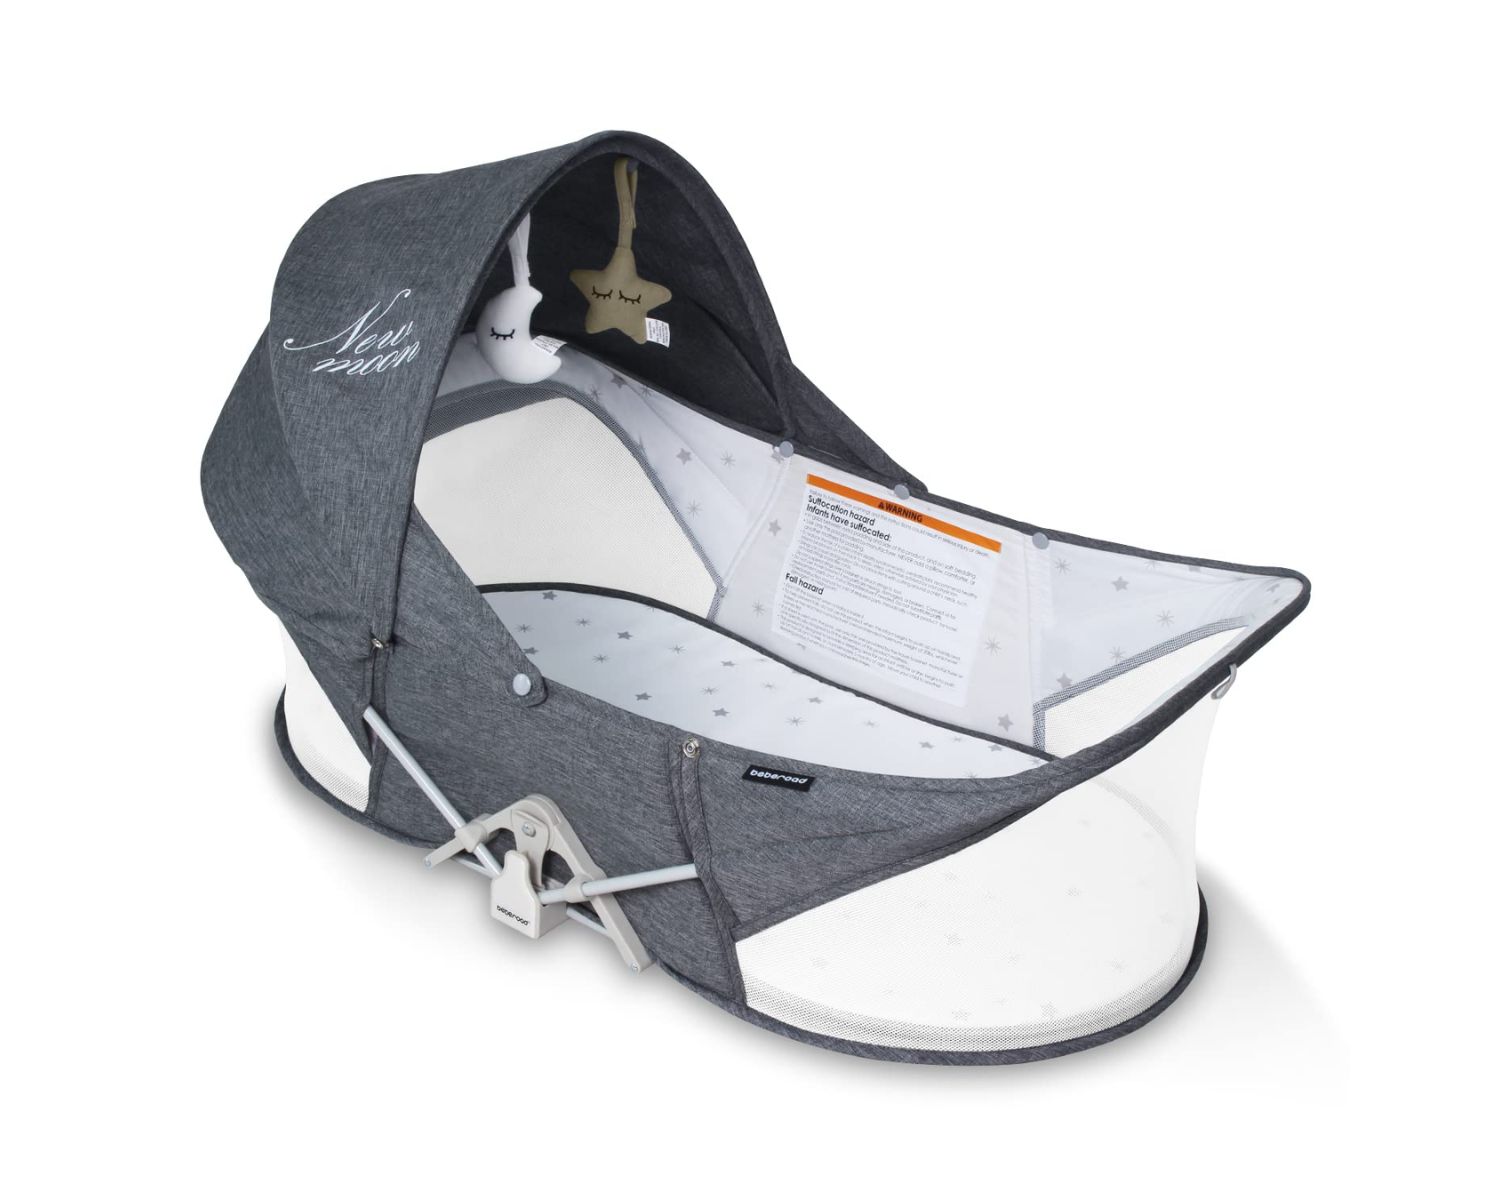 Portable Baby Bed Review: The Best Options for On-the-Go Parents